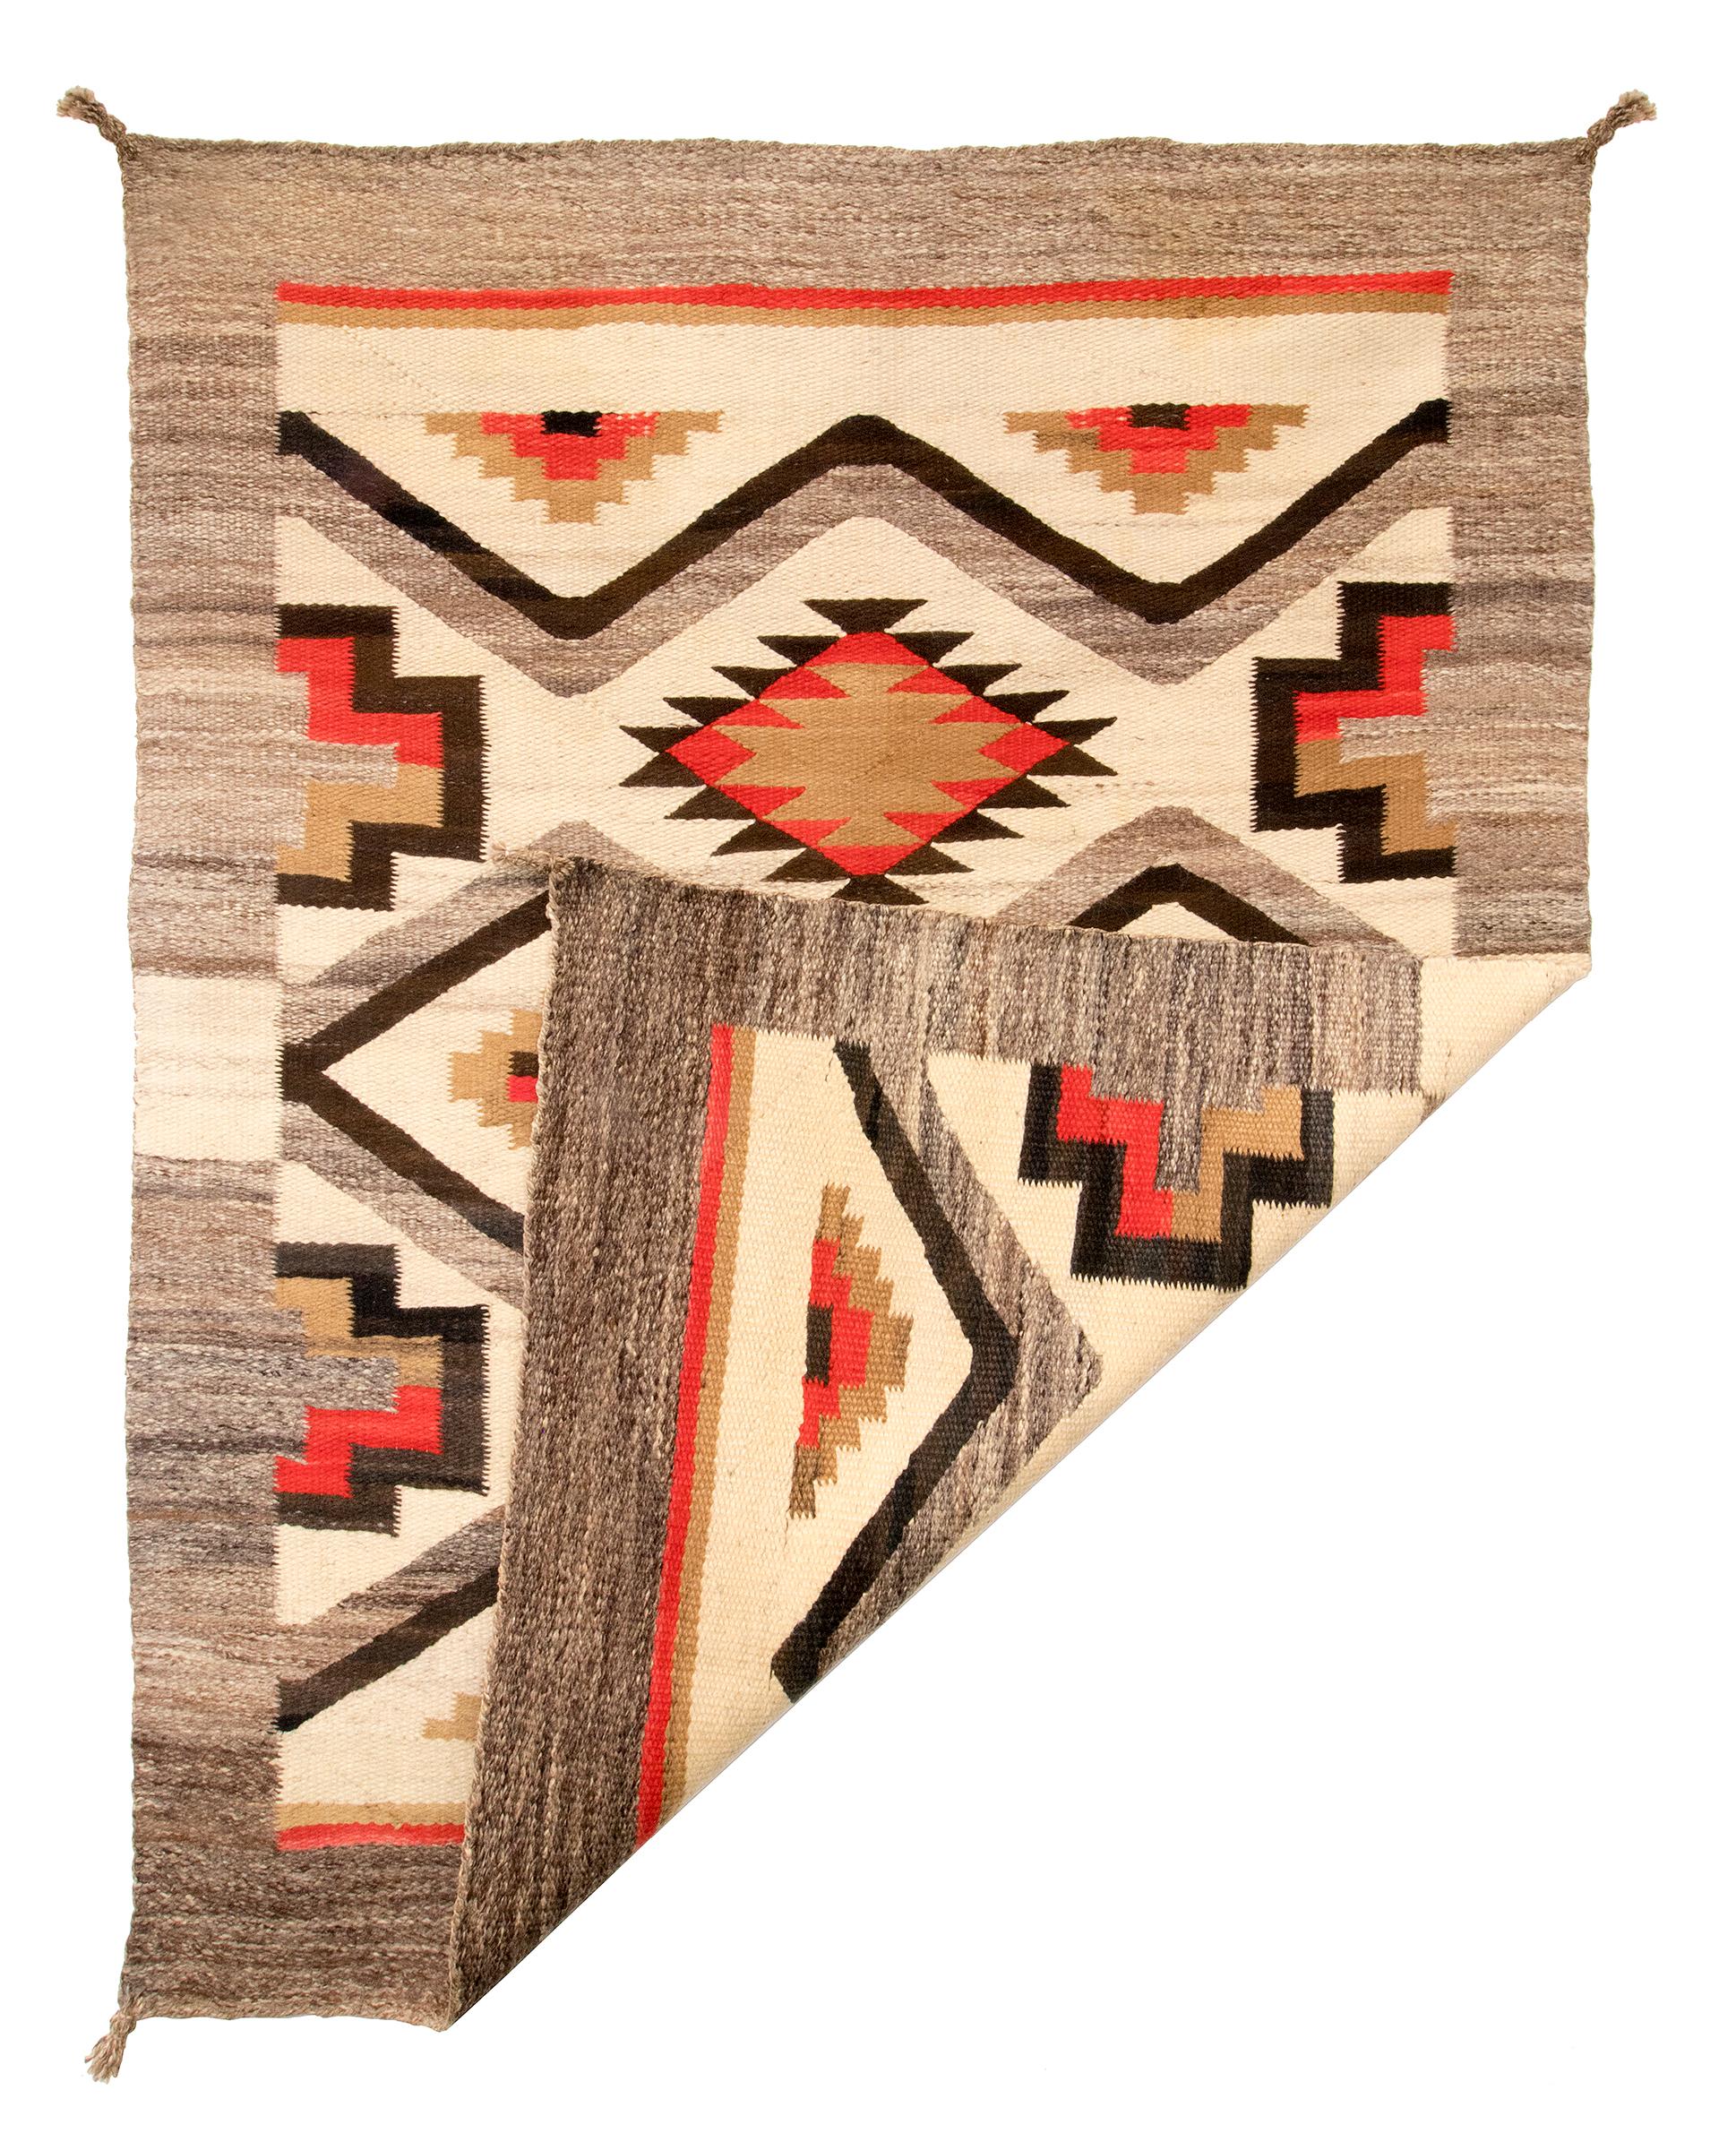 Vintage Trading Post era Navajo rug. Woven of native handspun wool in natural fleece colors of gray, ivory, dark brown and camel/beige with aniline-dyed red. Unique design frames a classic diamond and a pictorial split cross pattern with a wide